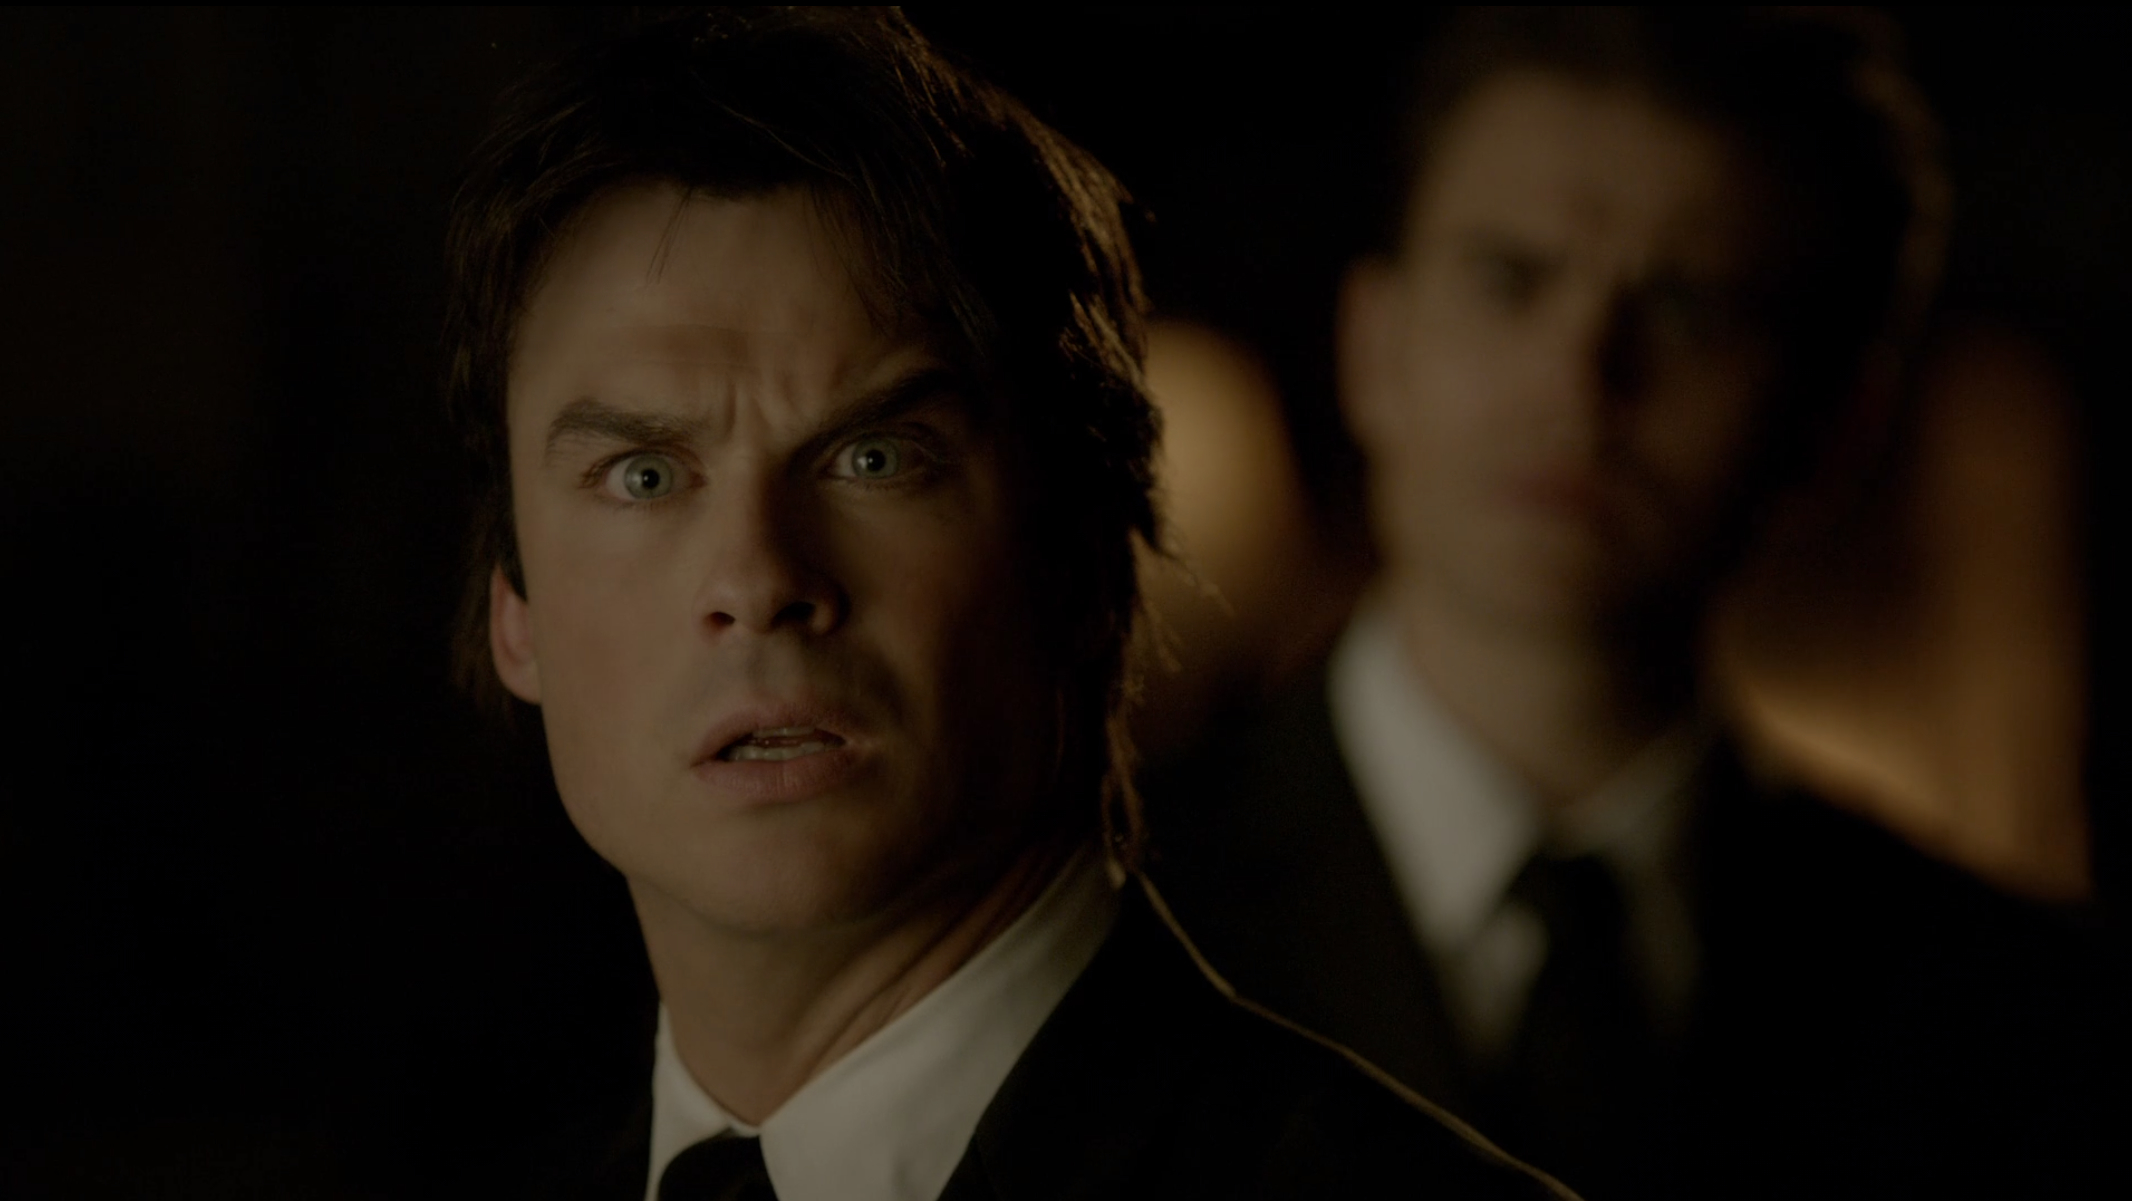 damon in the series finale of the vampire diaries